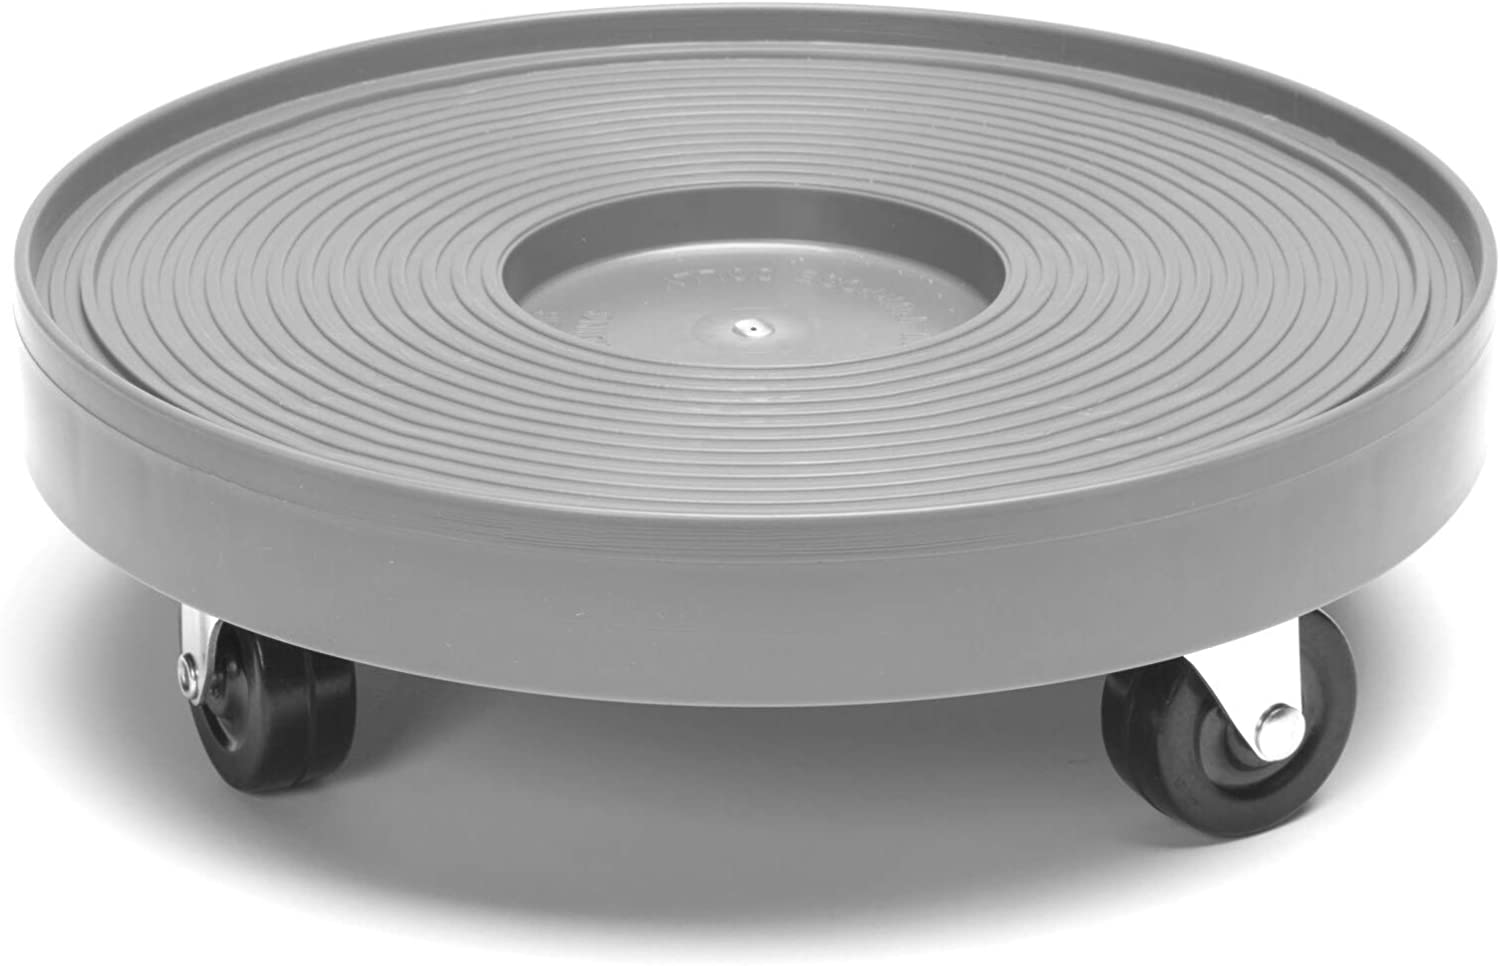 Gray Mist Plastic 12 inch Plant Dolly Without Hole Grey Round